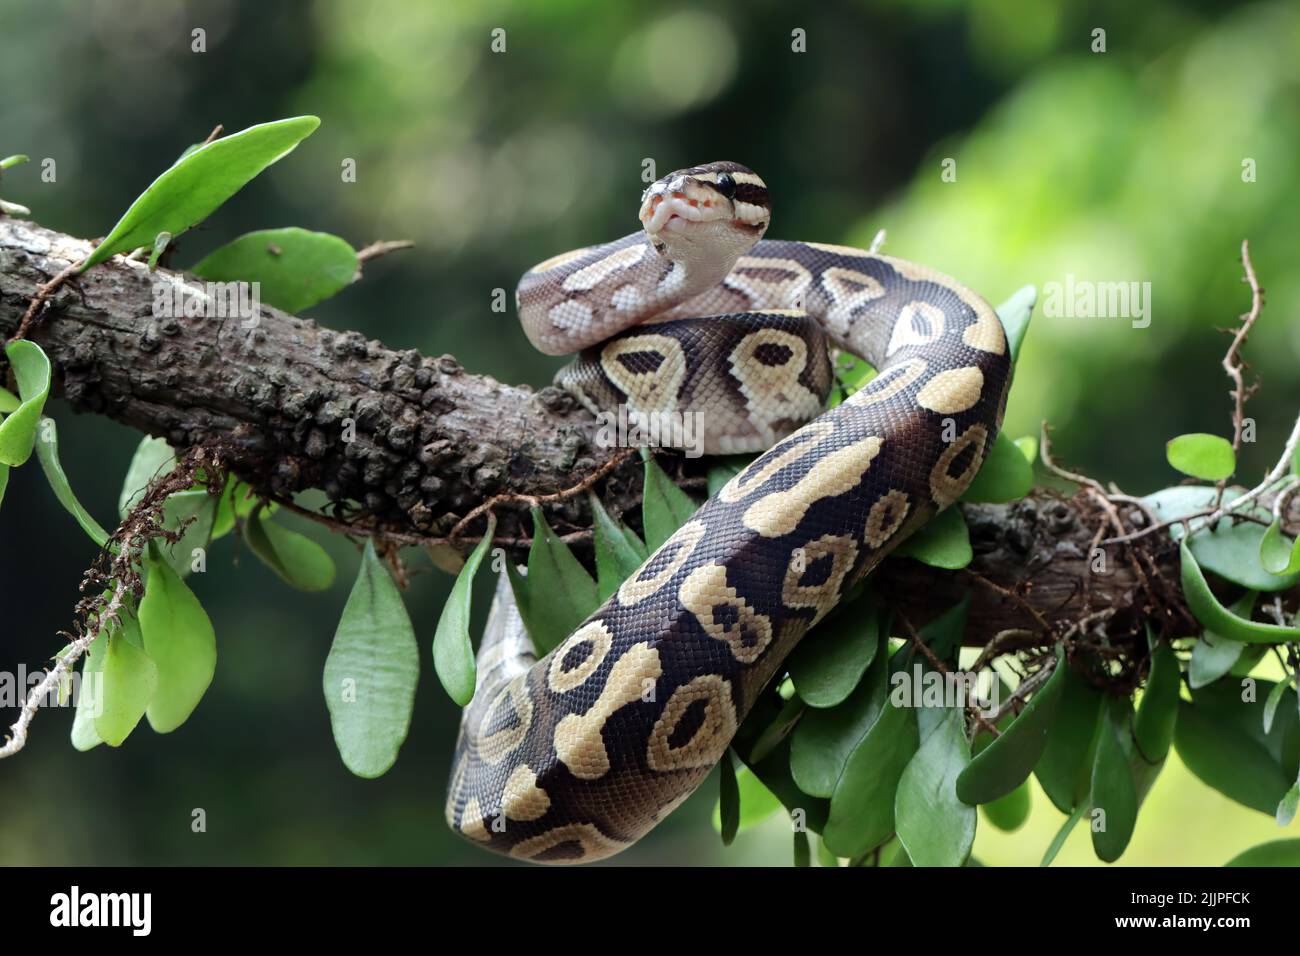 Close-up of a ball python on a branch, Indonesia Stock Photo